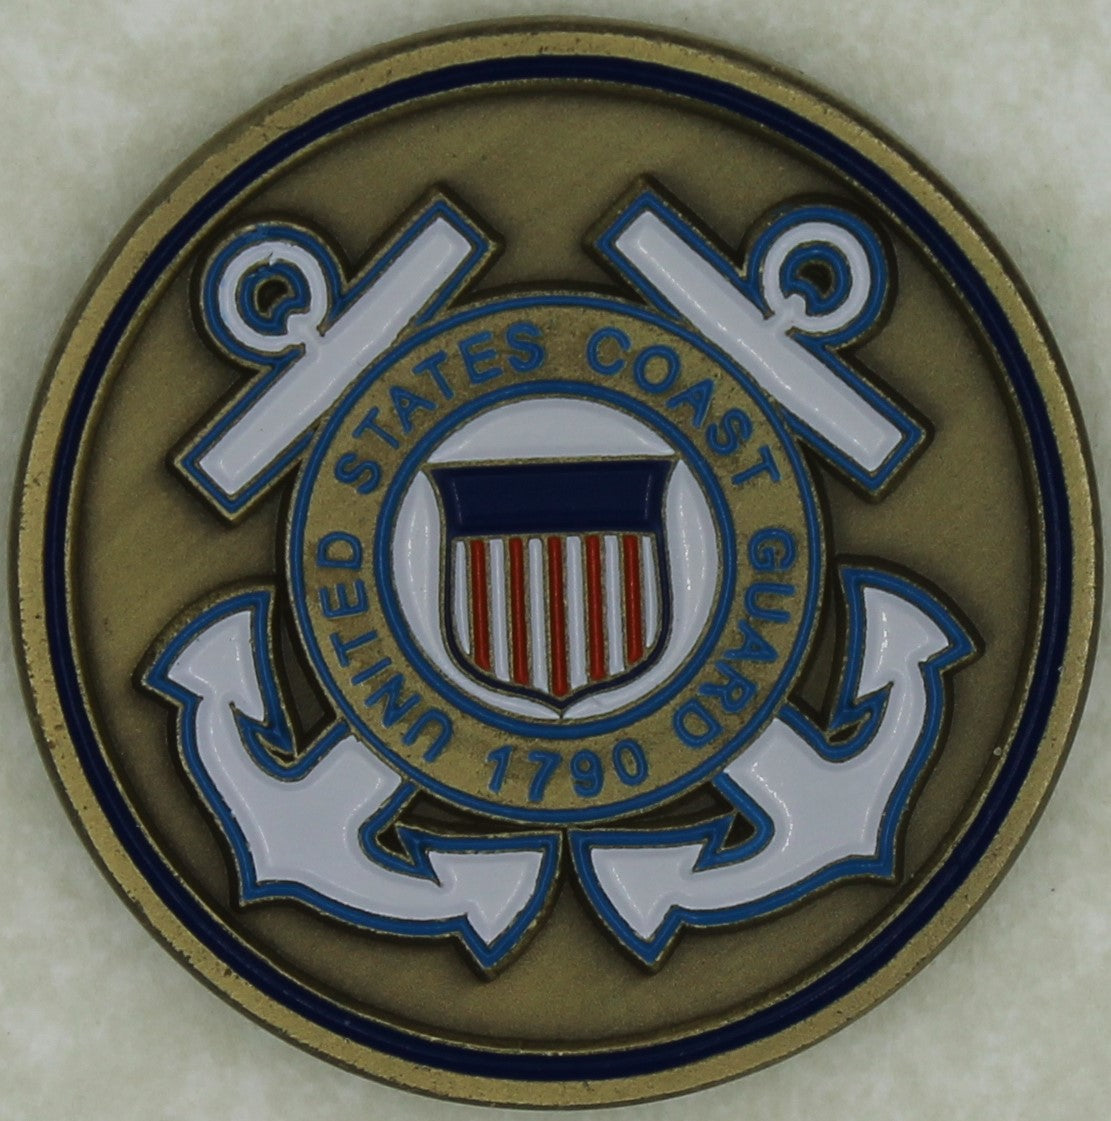 Master Chief Petty Officer Coast Guard Challenge Coin Rolyat Military